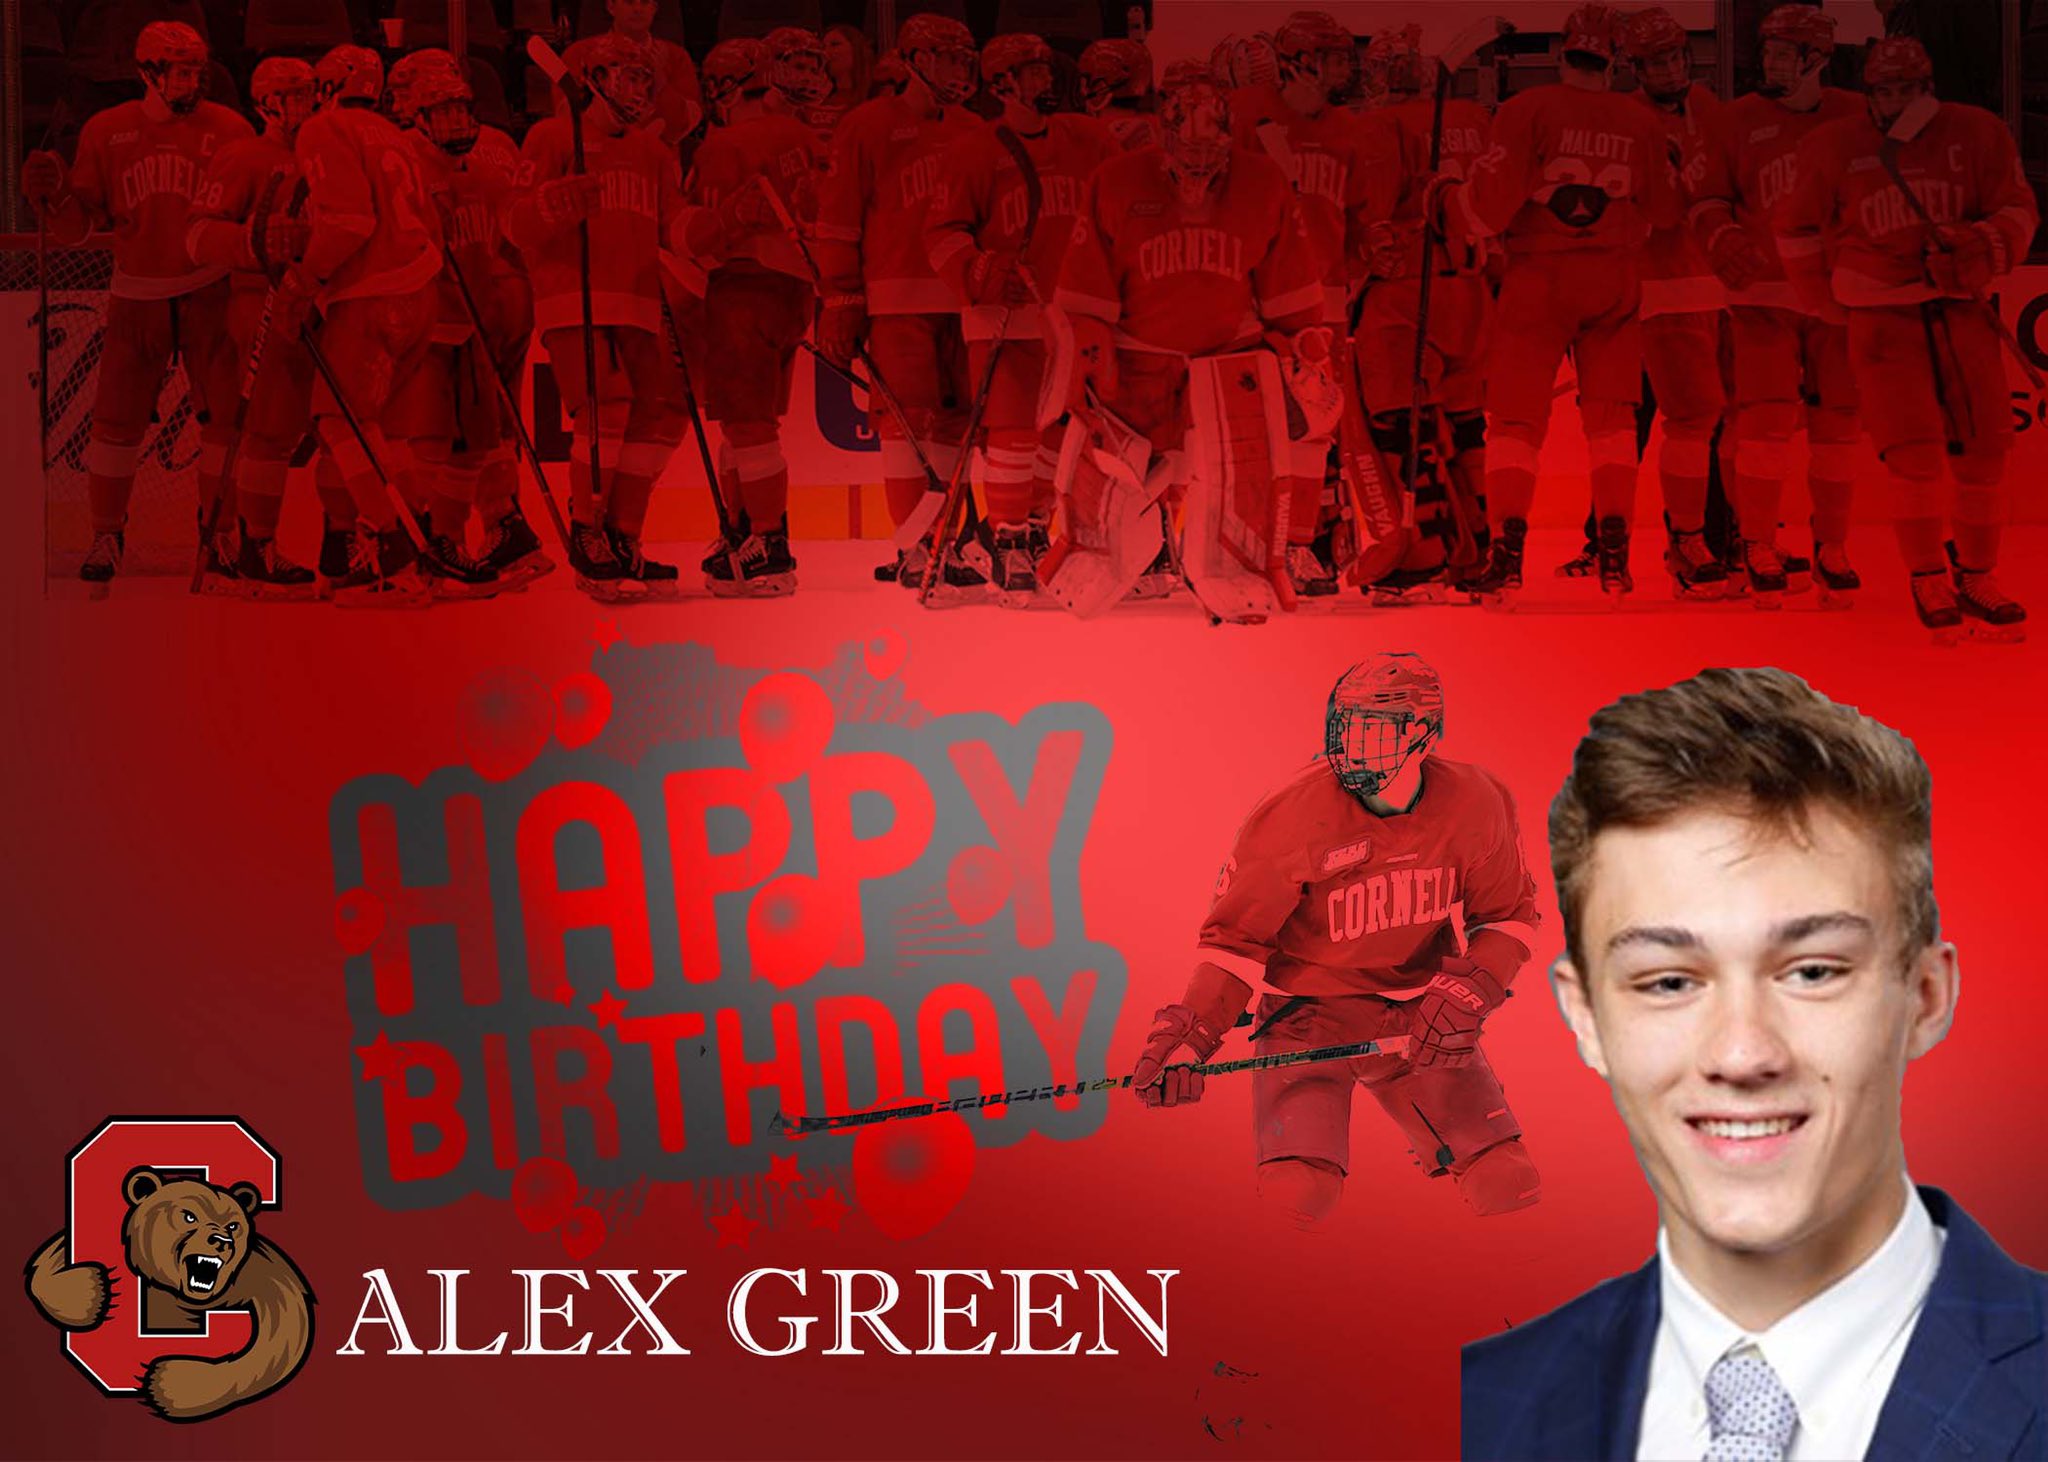 From the team Happy Birthday shout out to Alex Green.  : Ned Dykes 